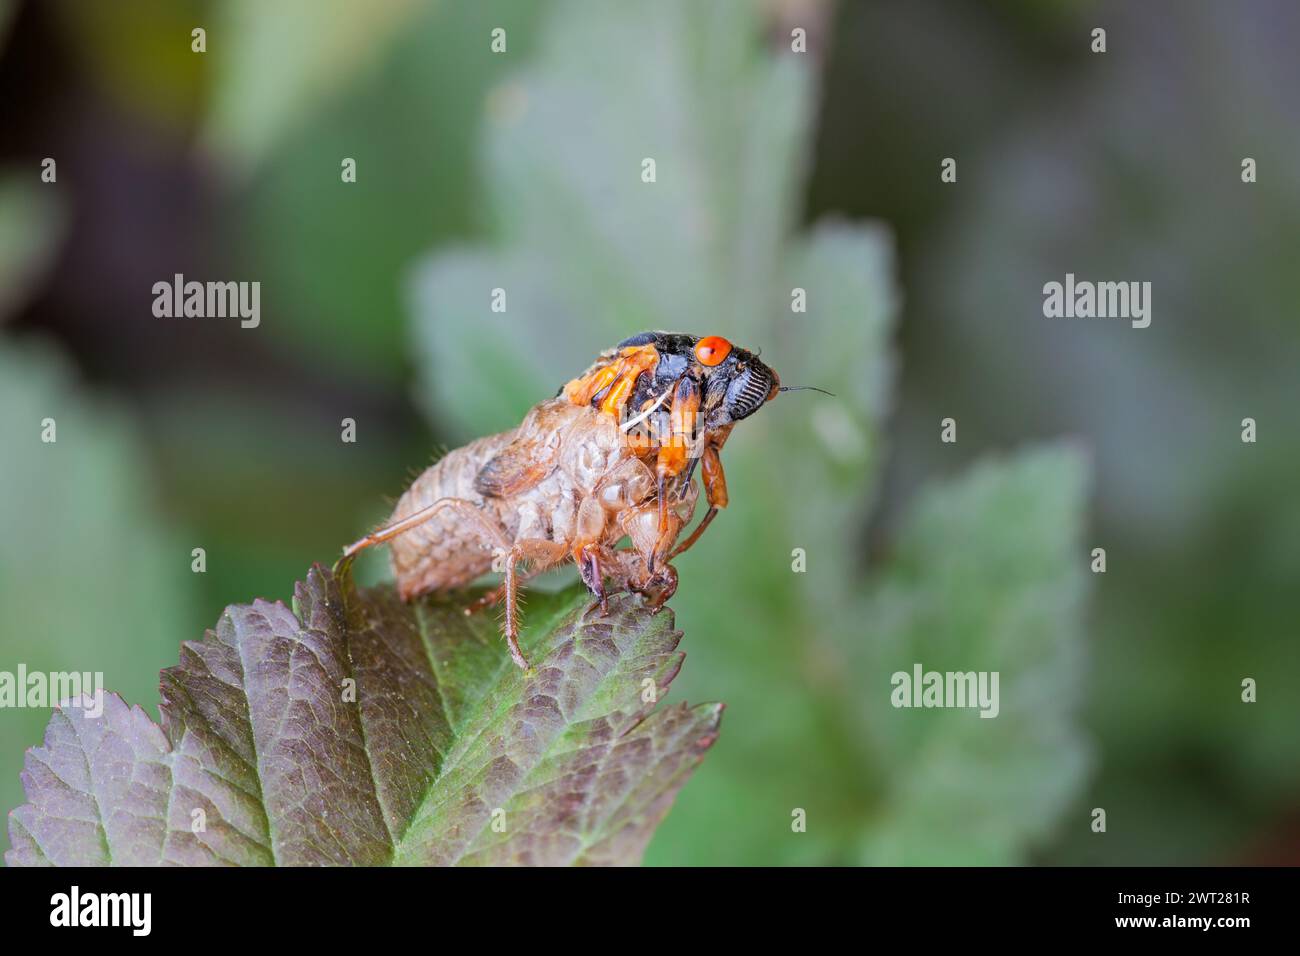 A cicada slowing emerges from its shell while hanging precarious from a leaf. Stock Photo